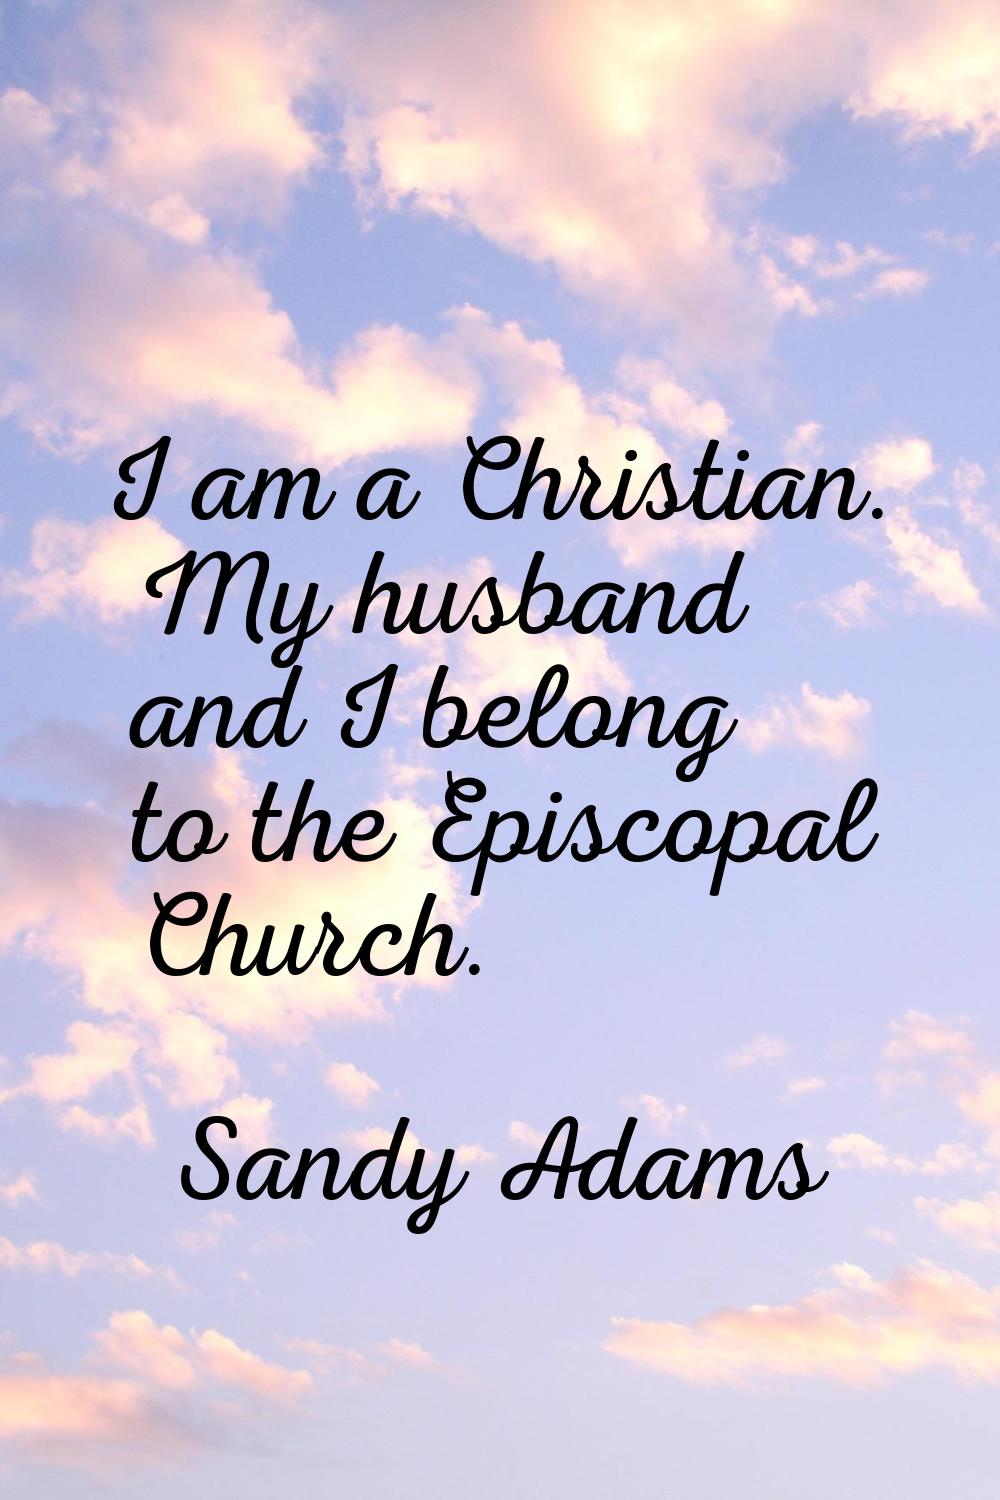 I am a Christian. My husband and I belong to the Episcopal Church.